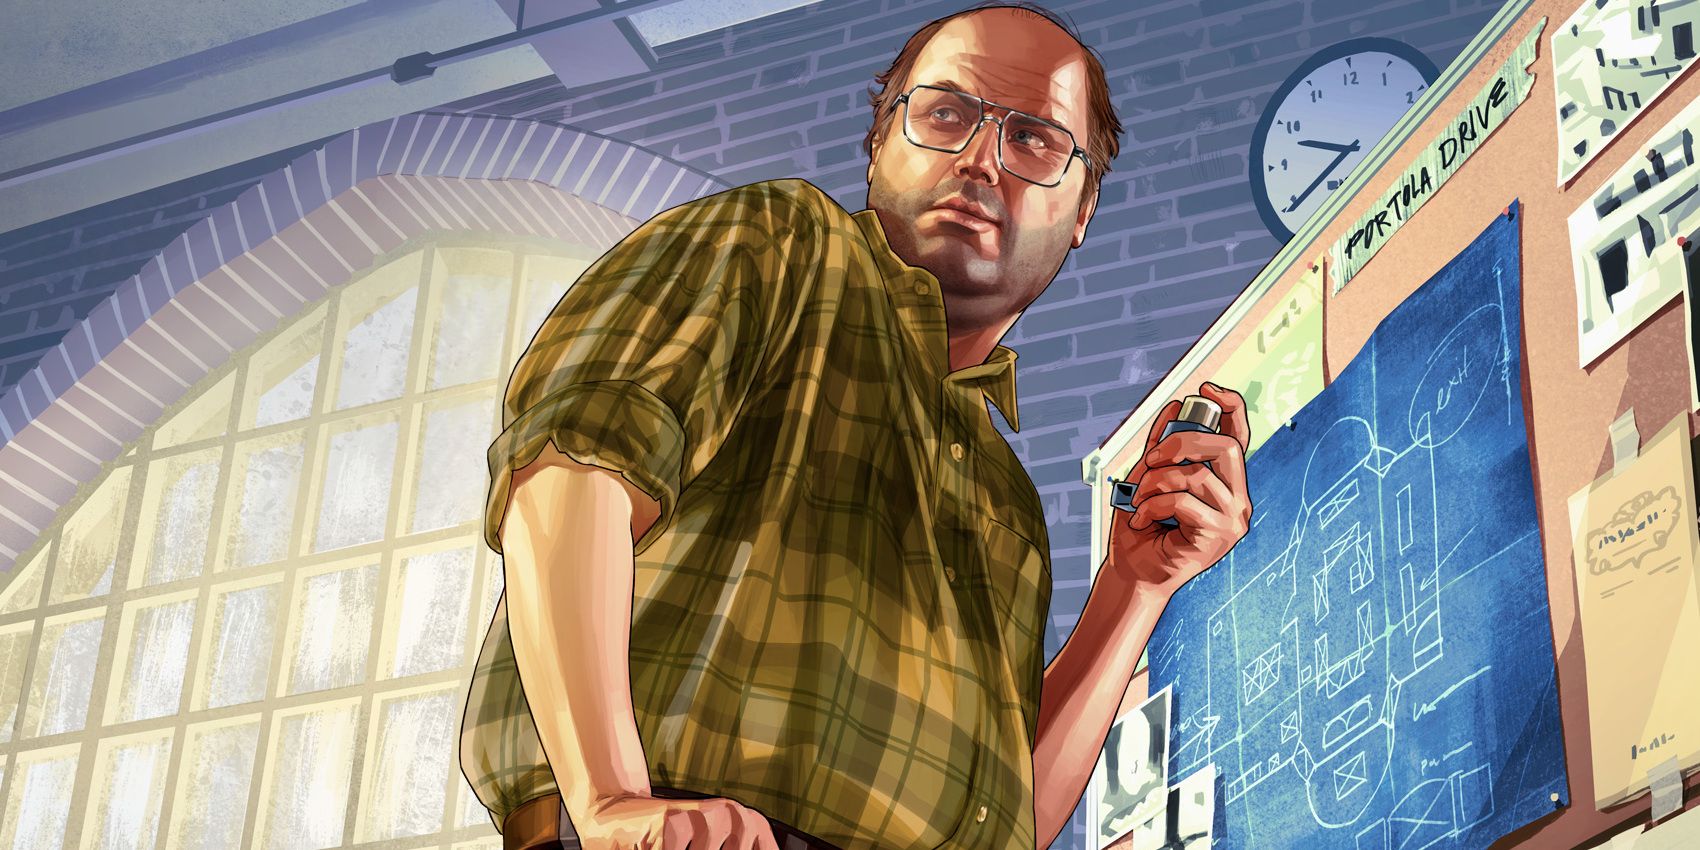 Lester from Grand Theft Auto 5